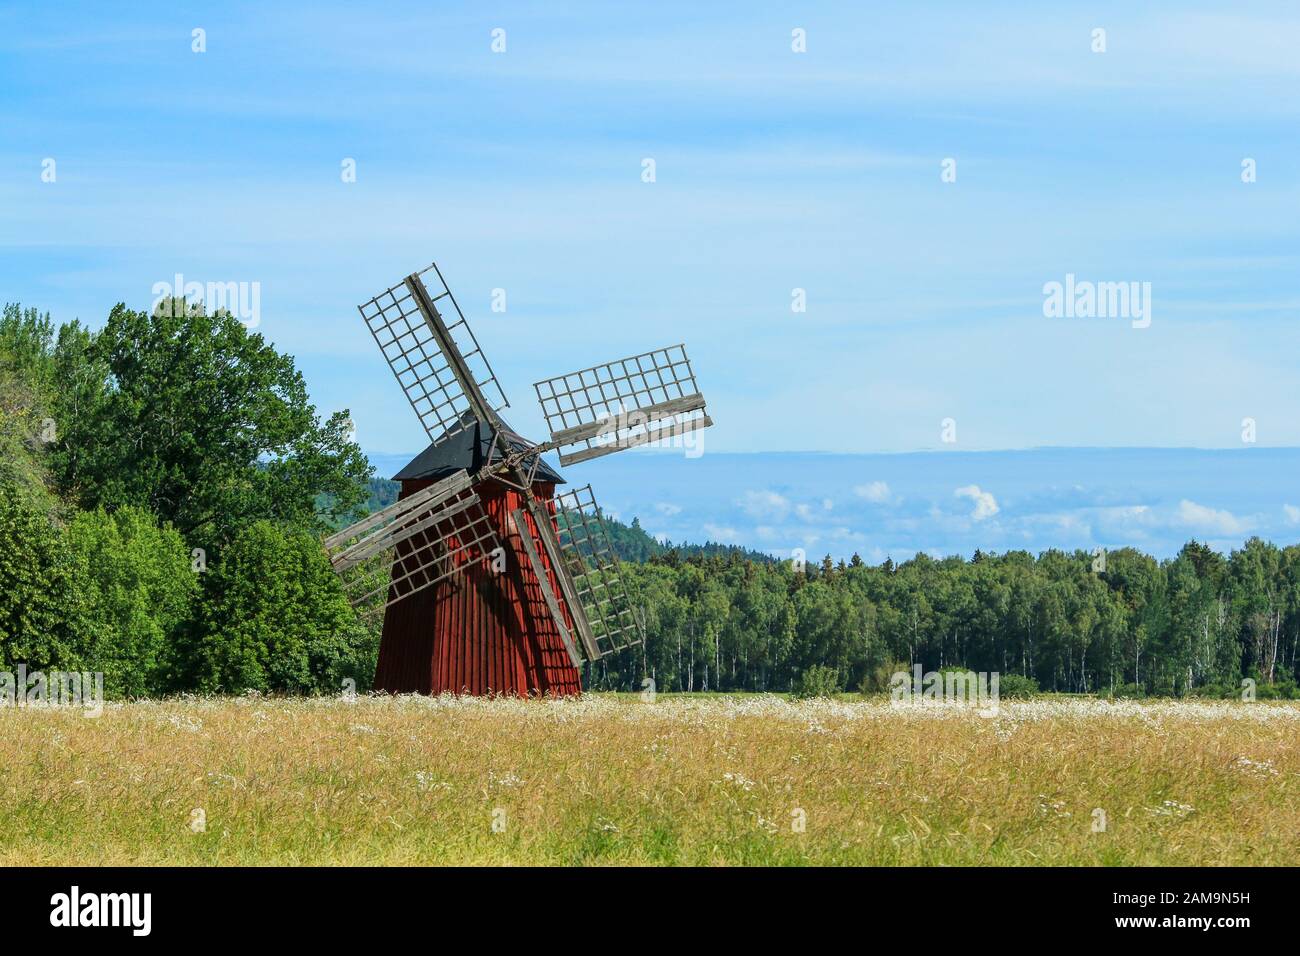 The typical red Swedish windmill standing in the fields full of grain. The rural landscape of the Swedish countryside. Stock Photo